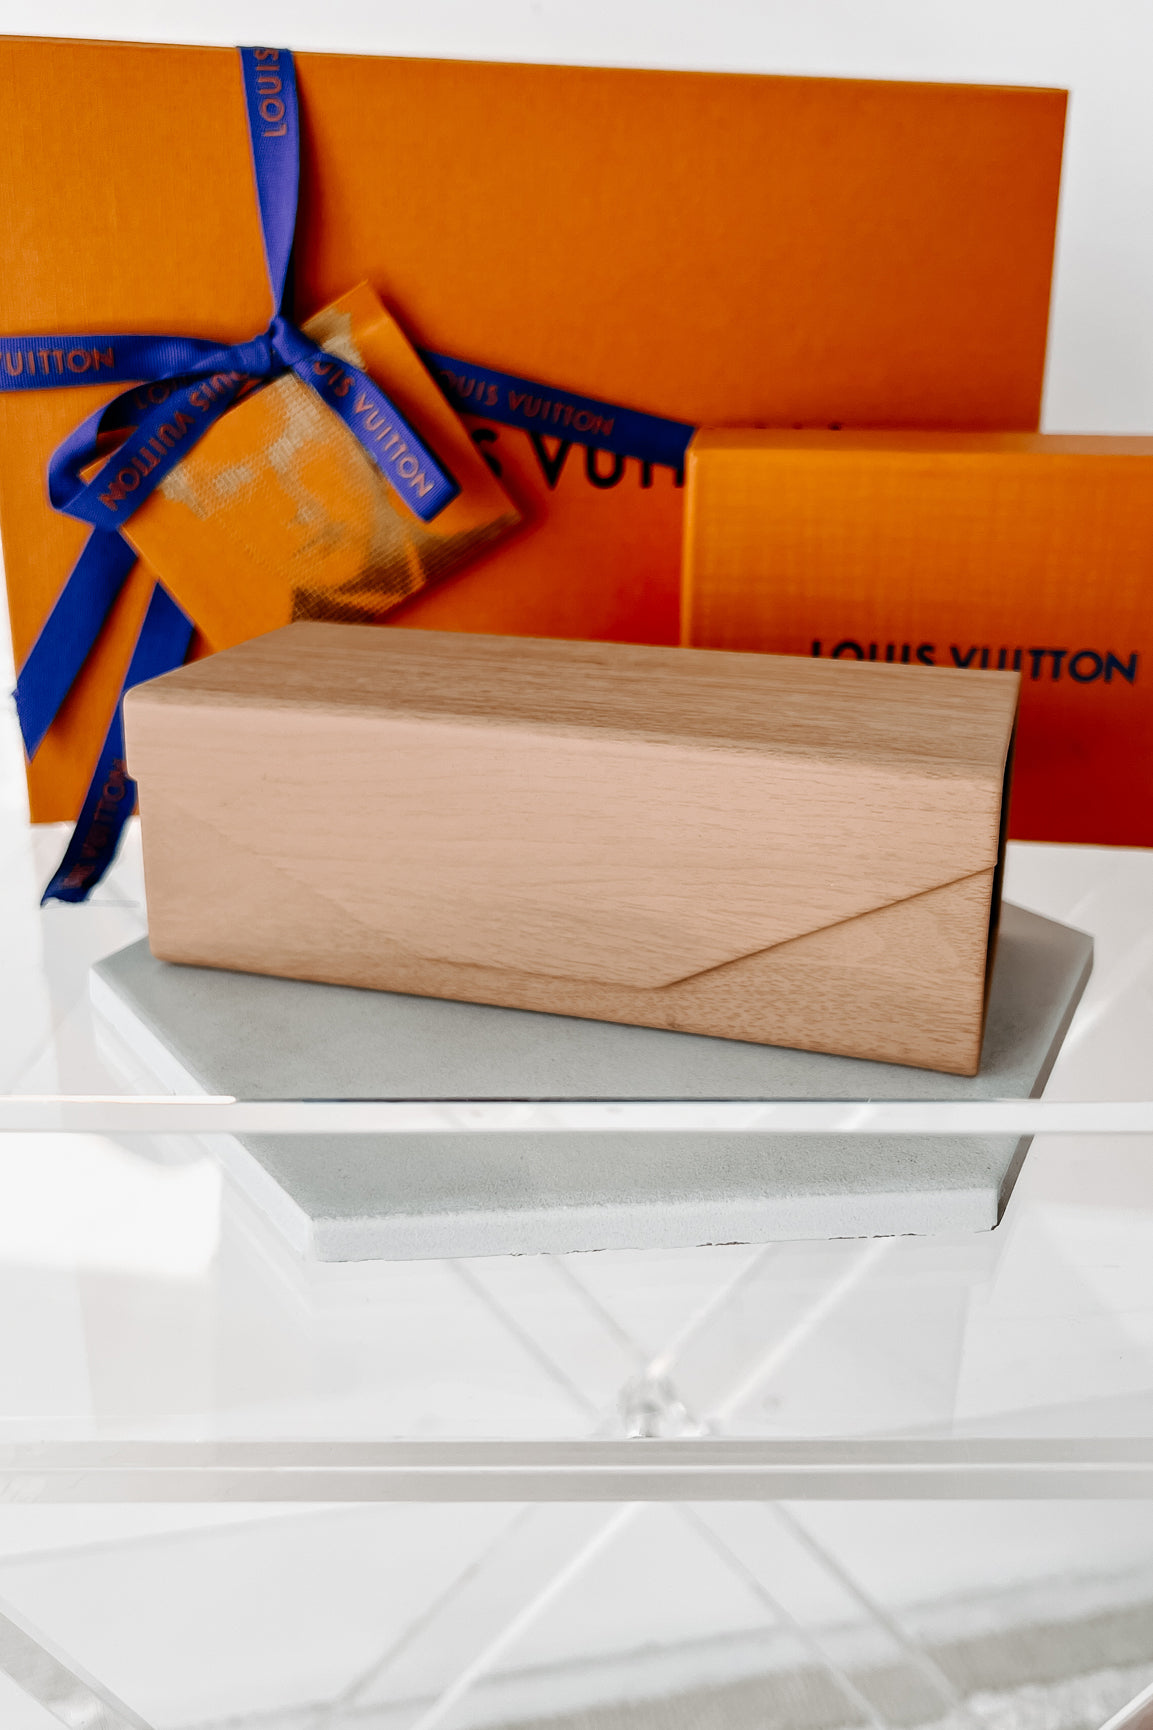 LOUIS VUITTON AUTHENTIC LARGE MAGNETIC GIFT BOX WRAPPED IN RIBBON